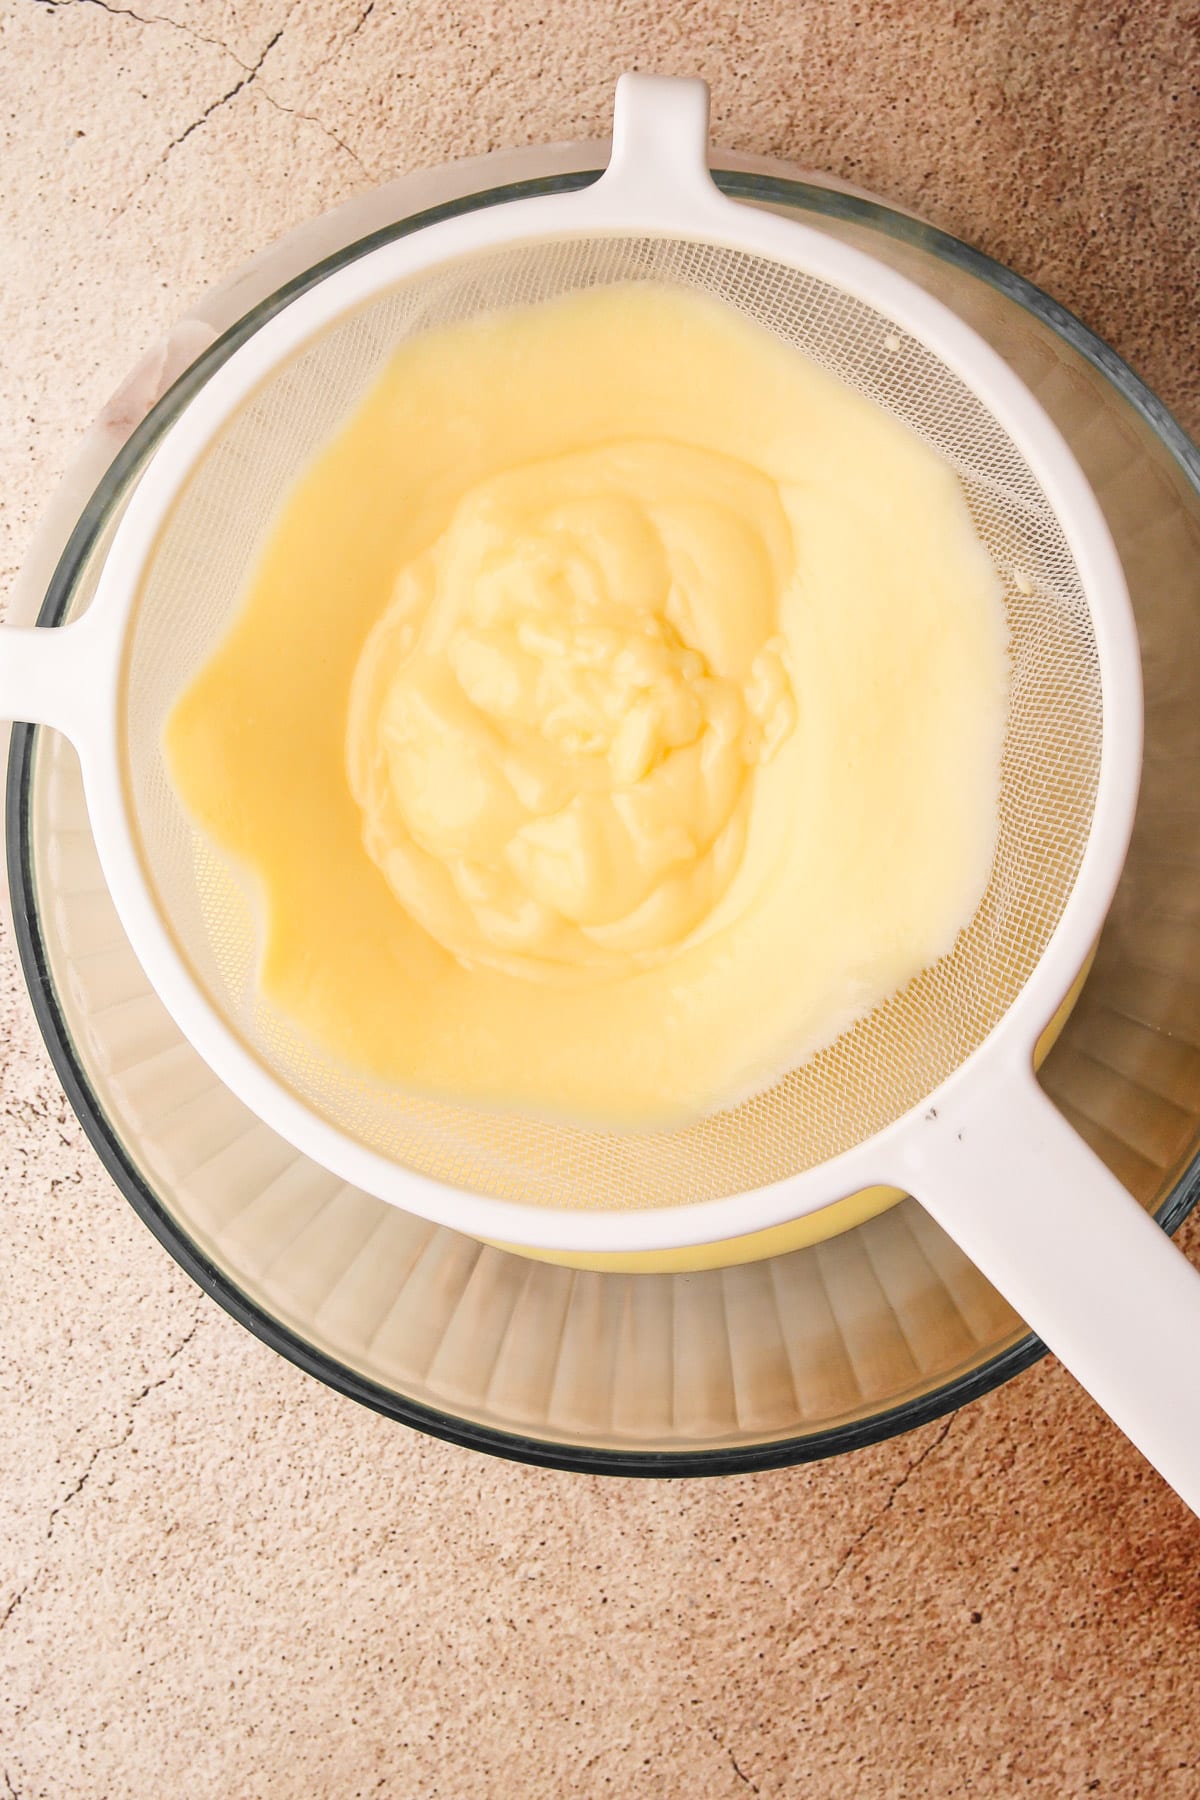 Straining cooked vanilla pudding into a glass bowl.